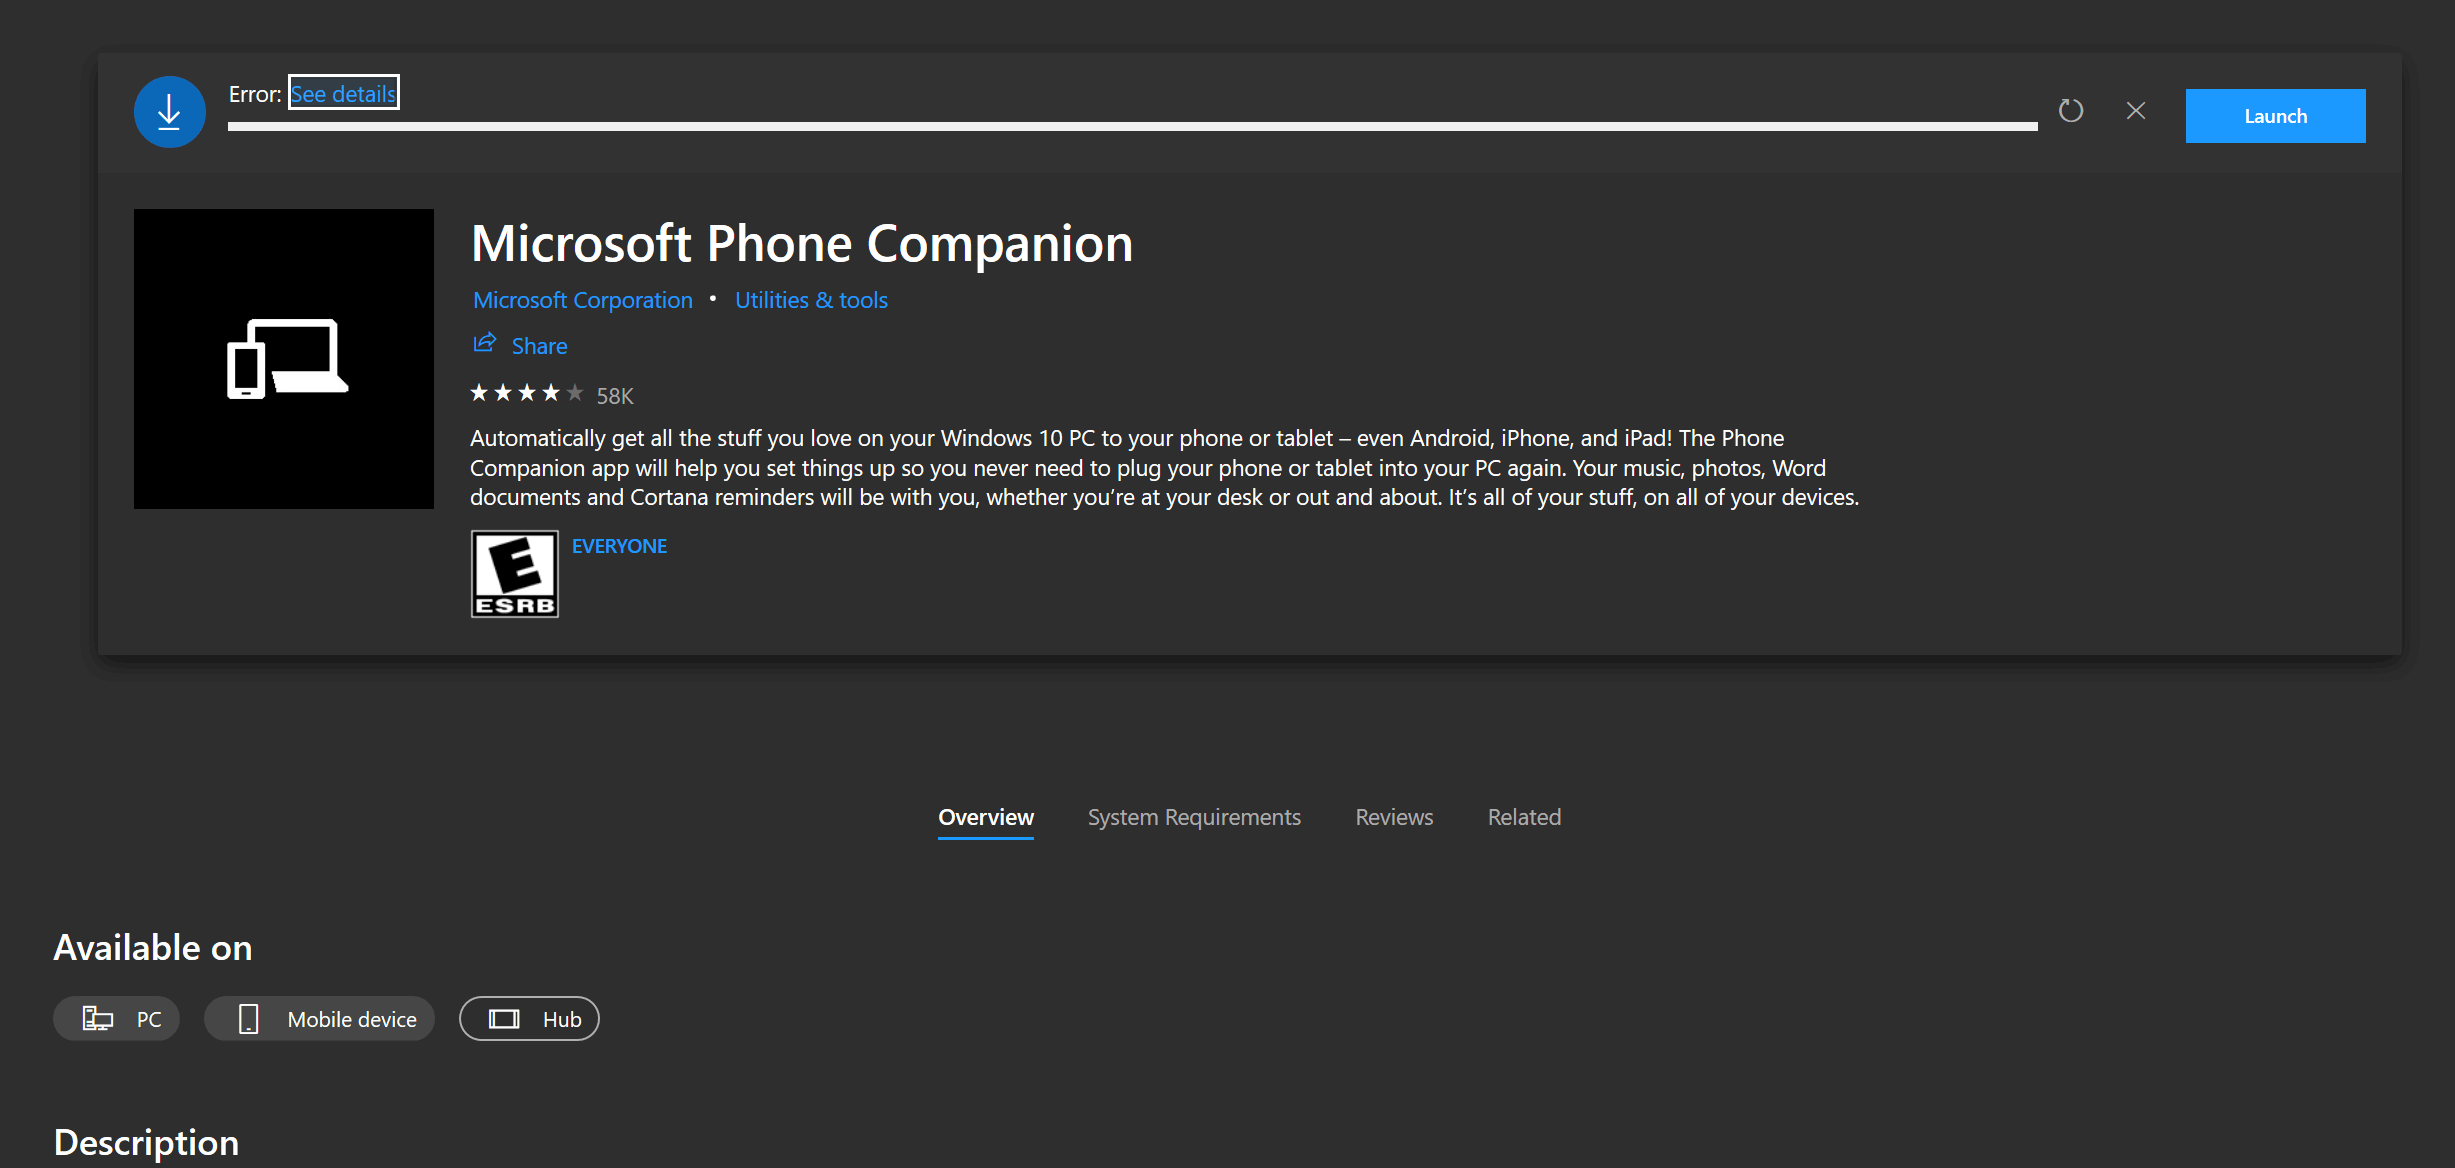 Windows Phone Dialler app possibly prepping for other devices - OnMSFT.com - August 8, 2018